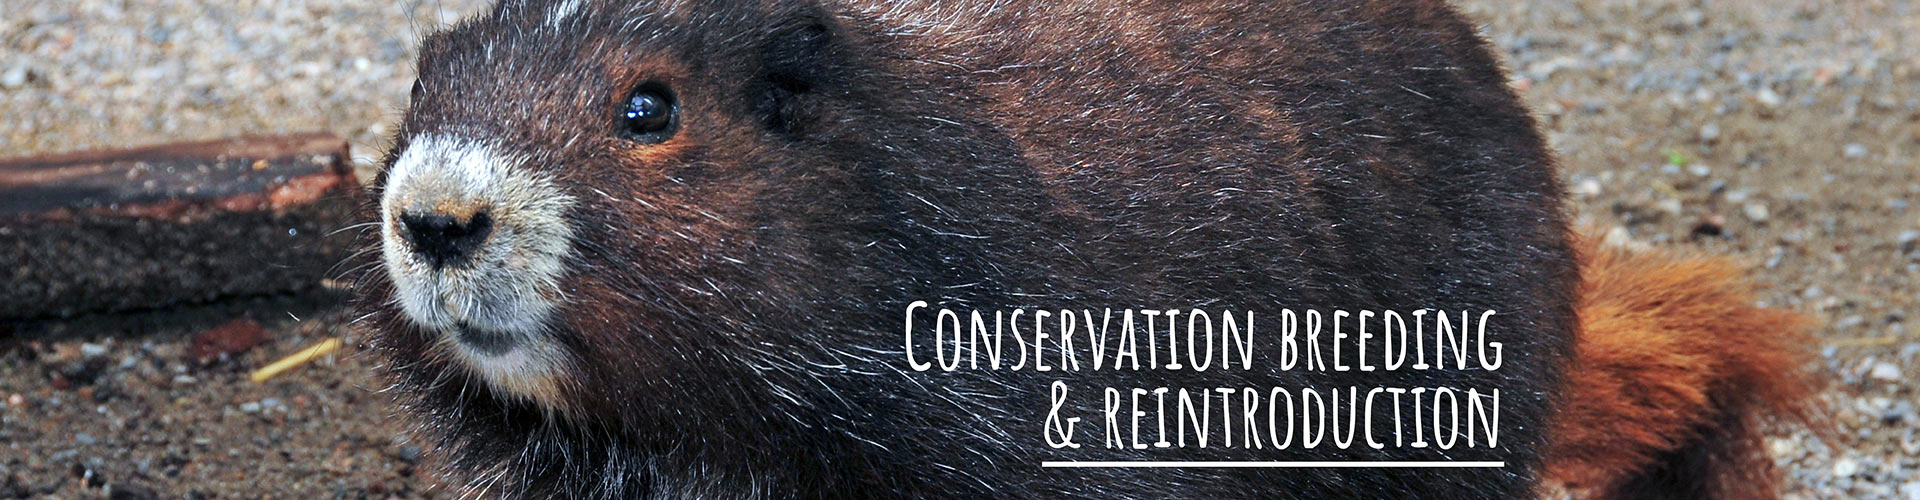 Conservation Breeding and Reintroduction